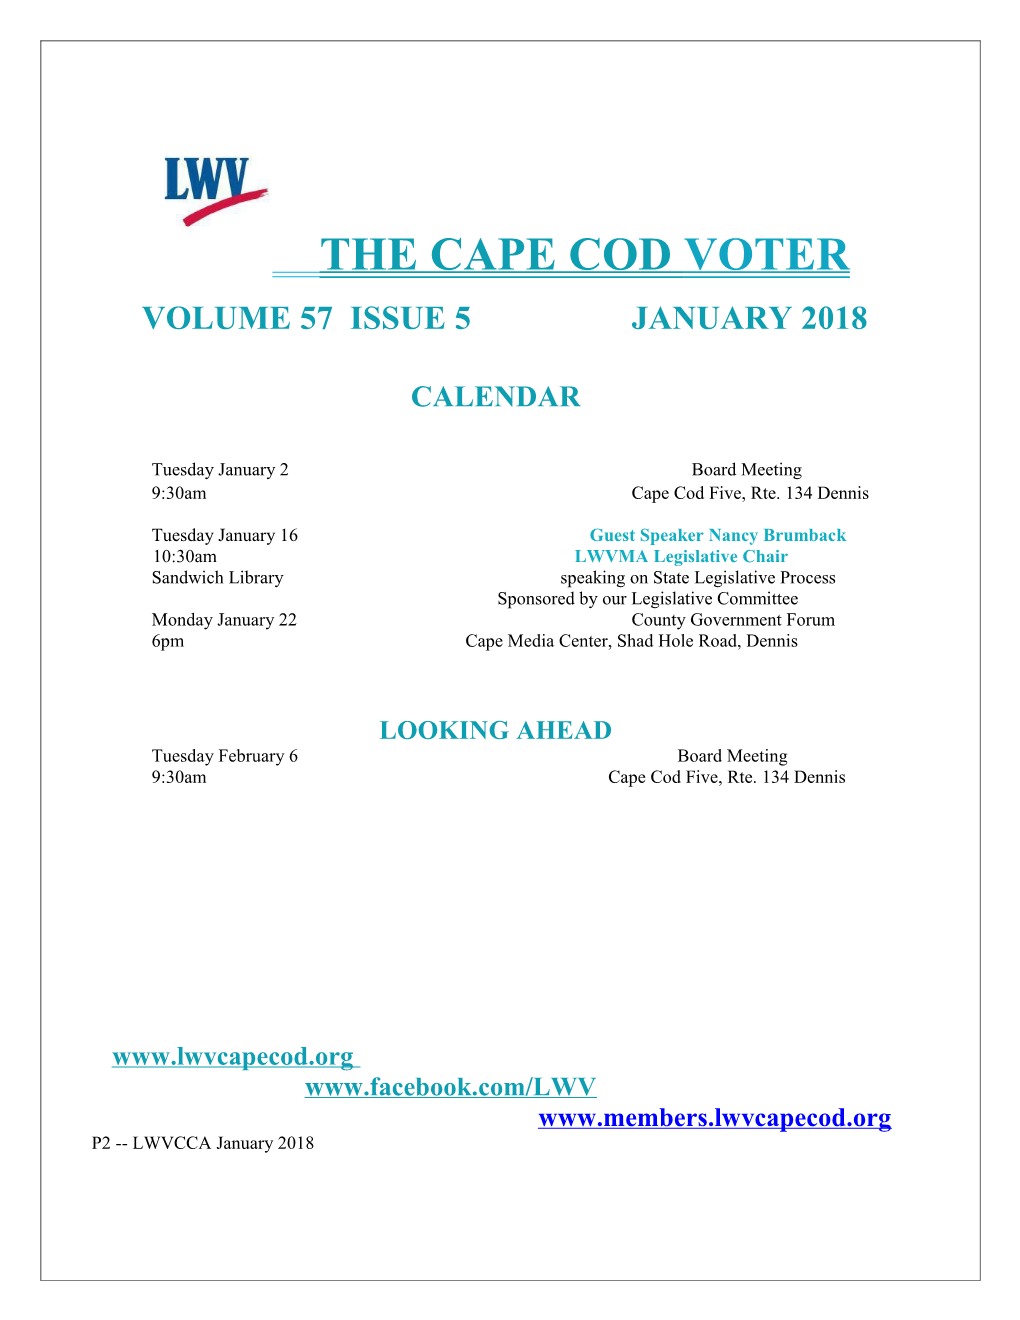 Tuesday January 2 Board Meeting 9:30Am Cape Cod Five, Rte. 134 Dennis